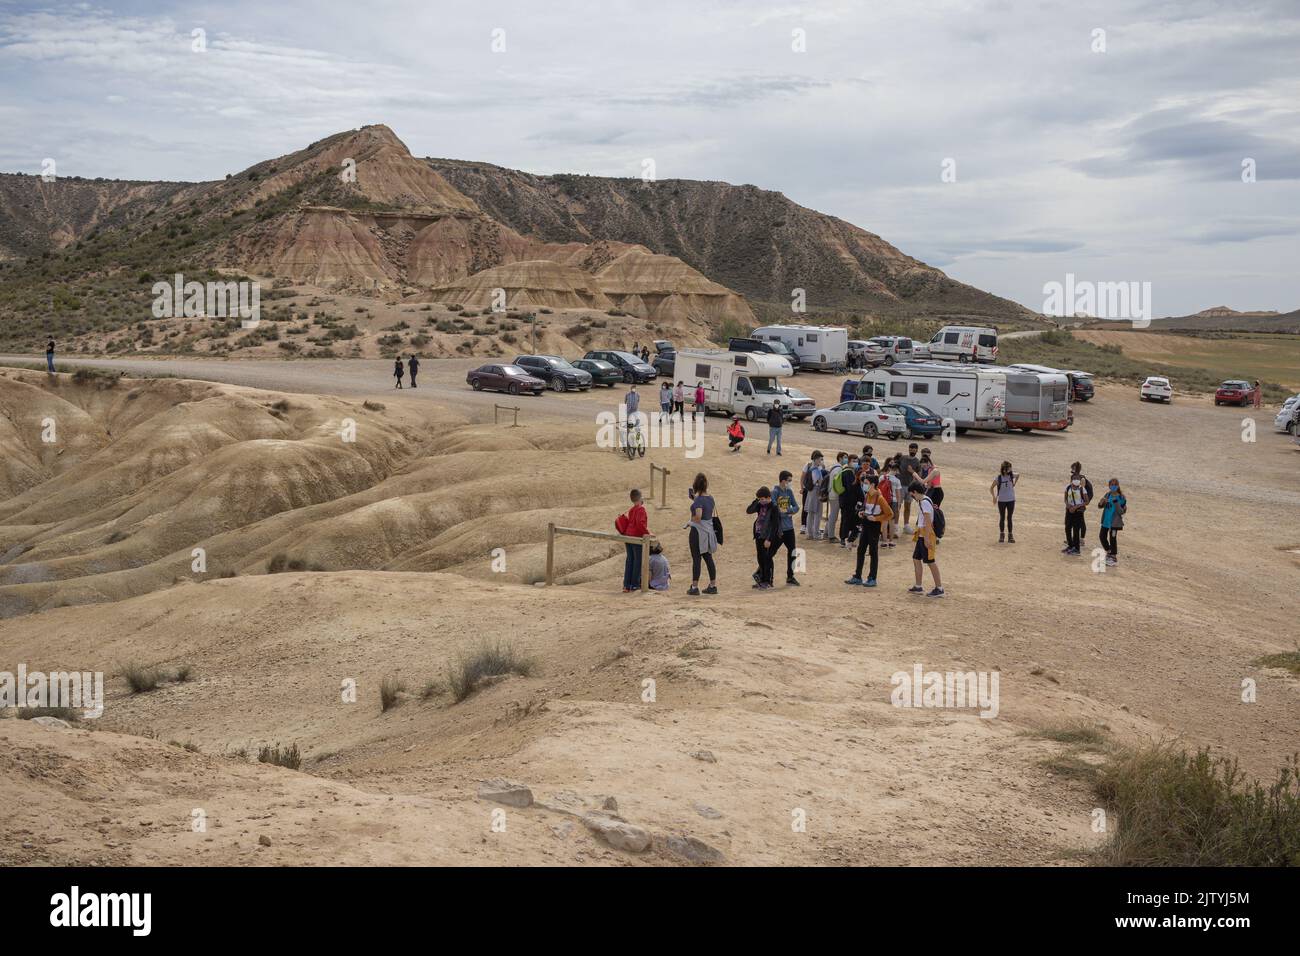 NAVARRA, SPAIN-MAY 5, 2021: Tourists in Badlans of Navarre (Bardenas Reales de Navarra) dessert in the middle of Spain. Stock Photo